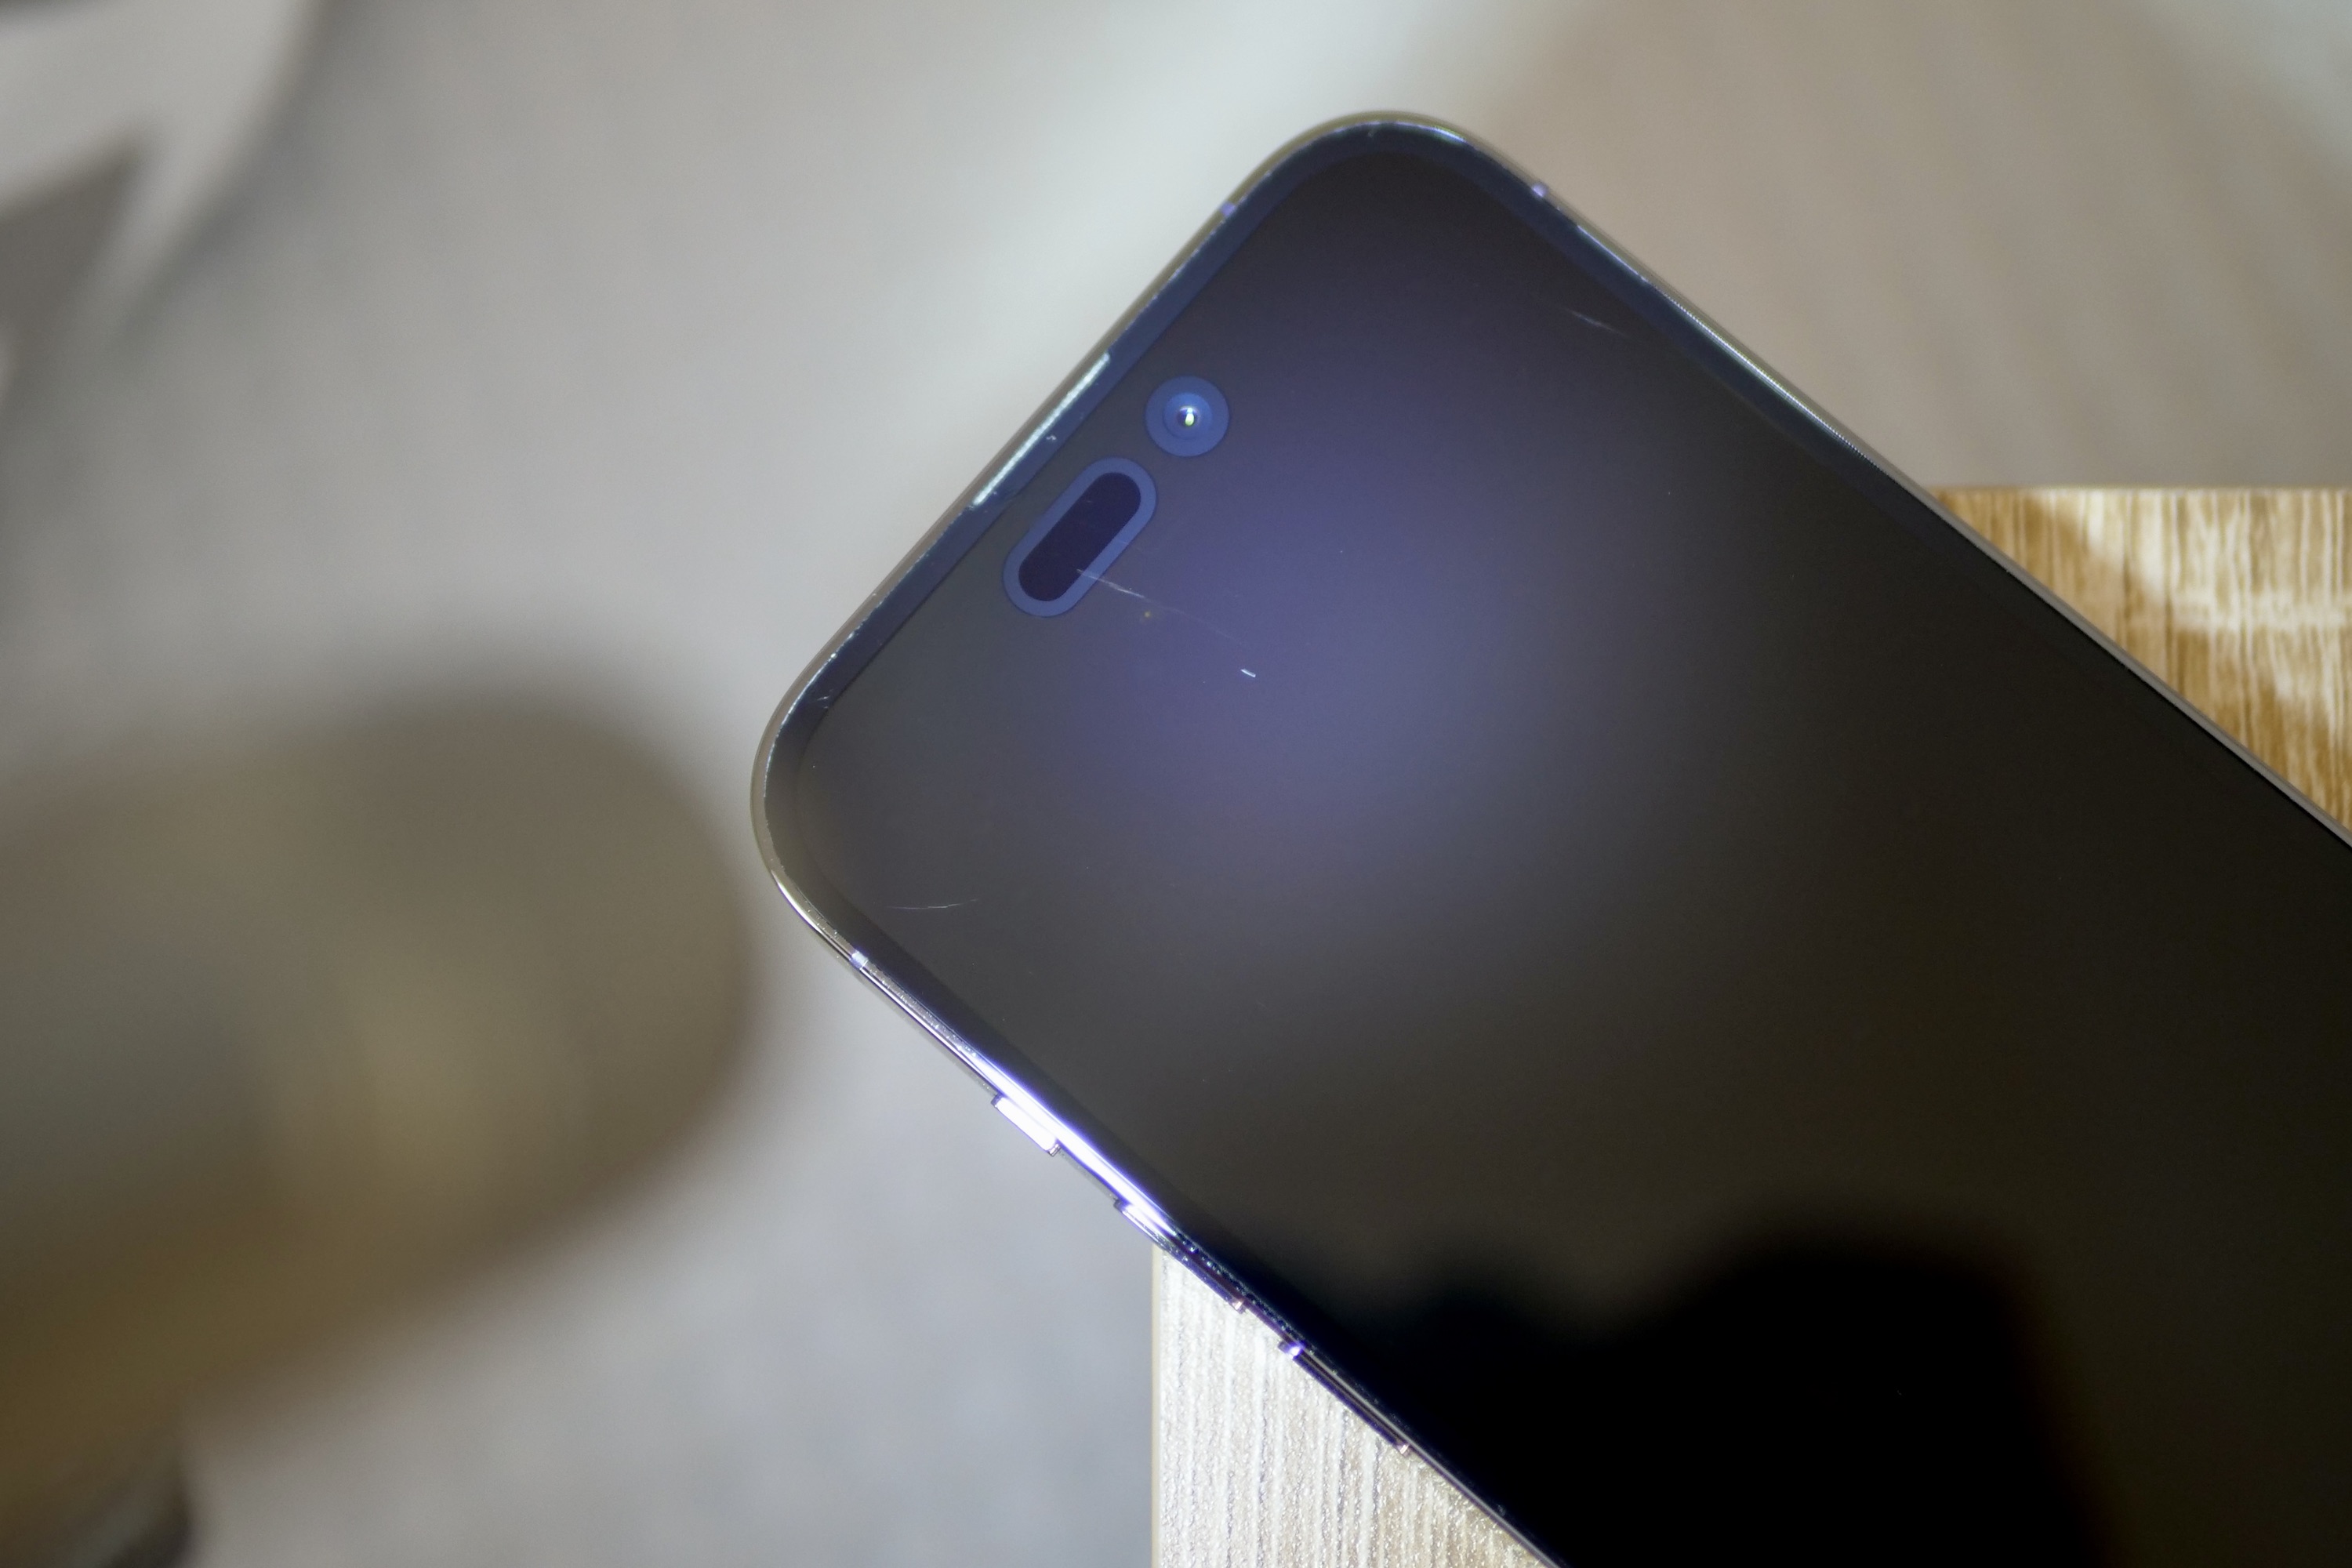 Ceramic Shield on the iPhone 14 Pro, with light to show scratches.